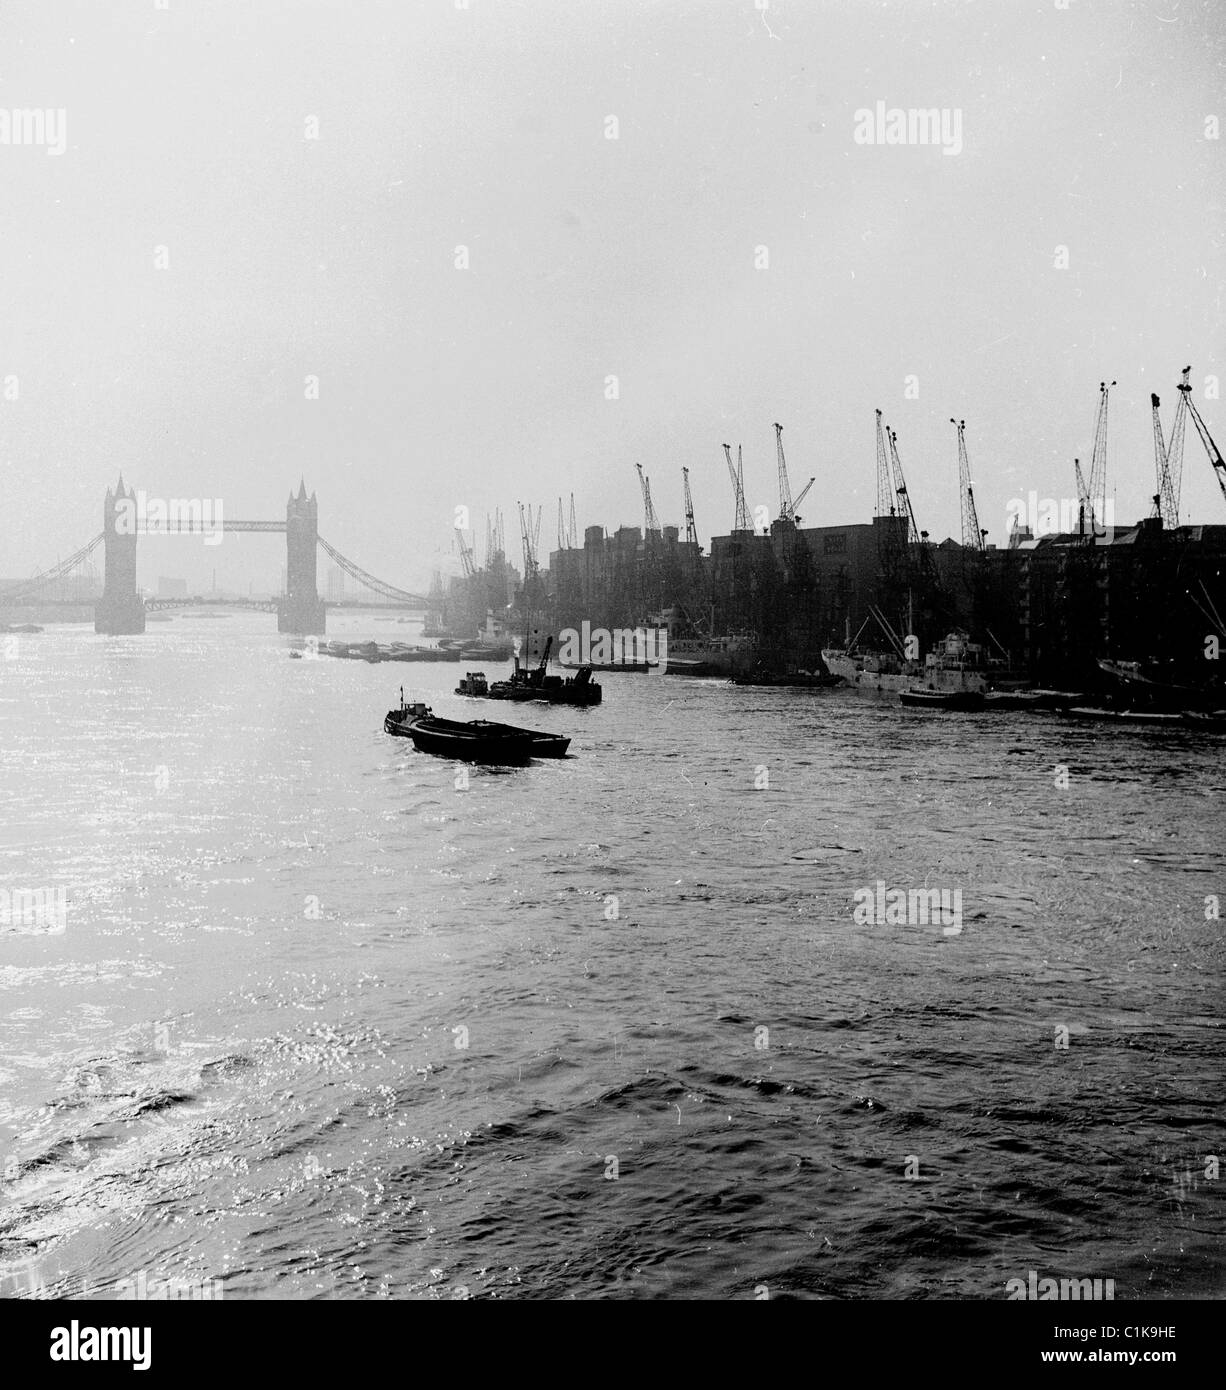 1950s. London. The famous Tower Bridge, seen as the morning mist settles over the river Thames in this picture by J Allan Cash. Stock Photo